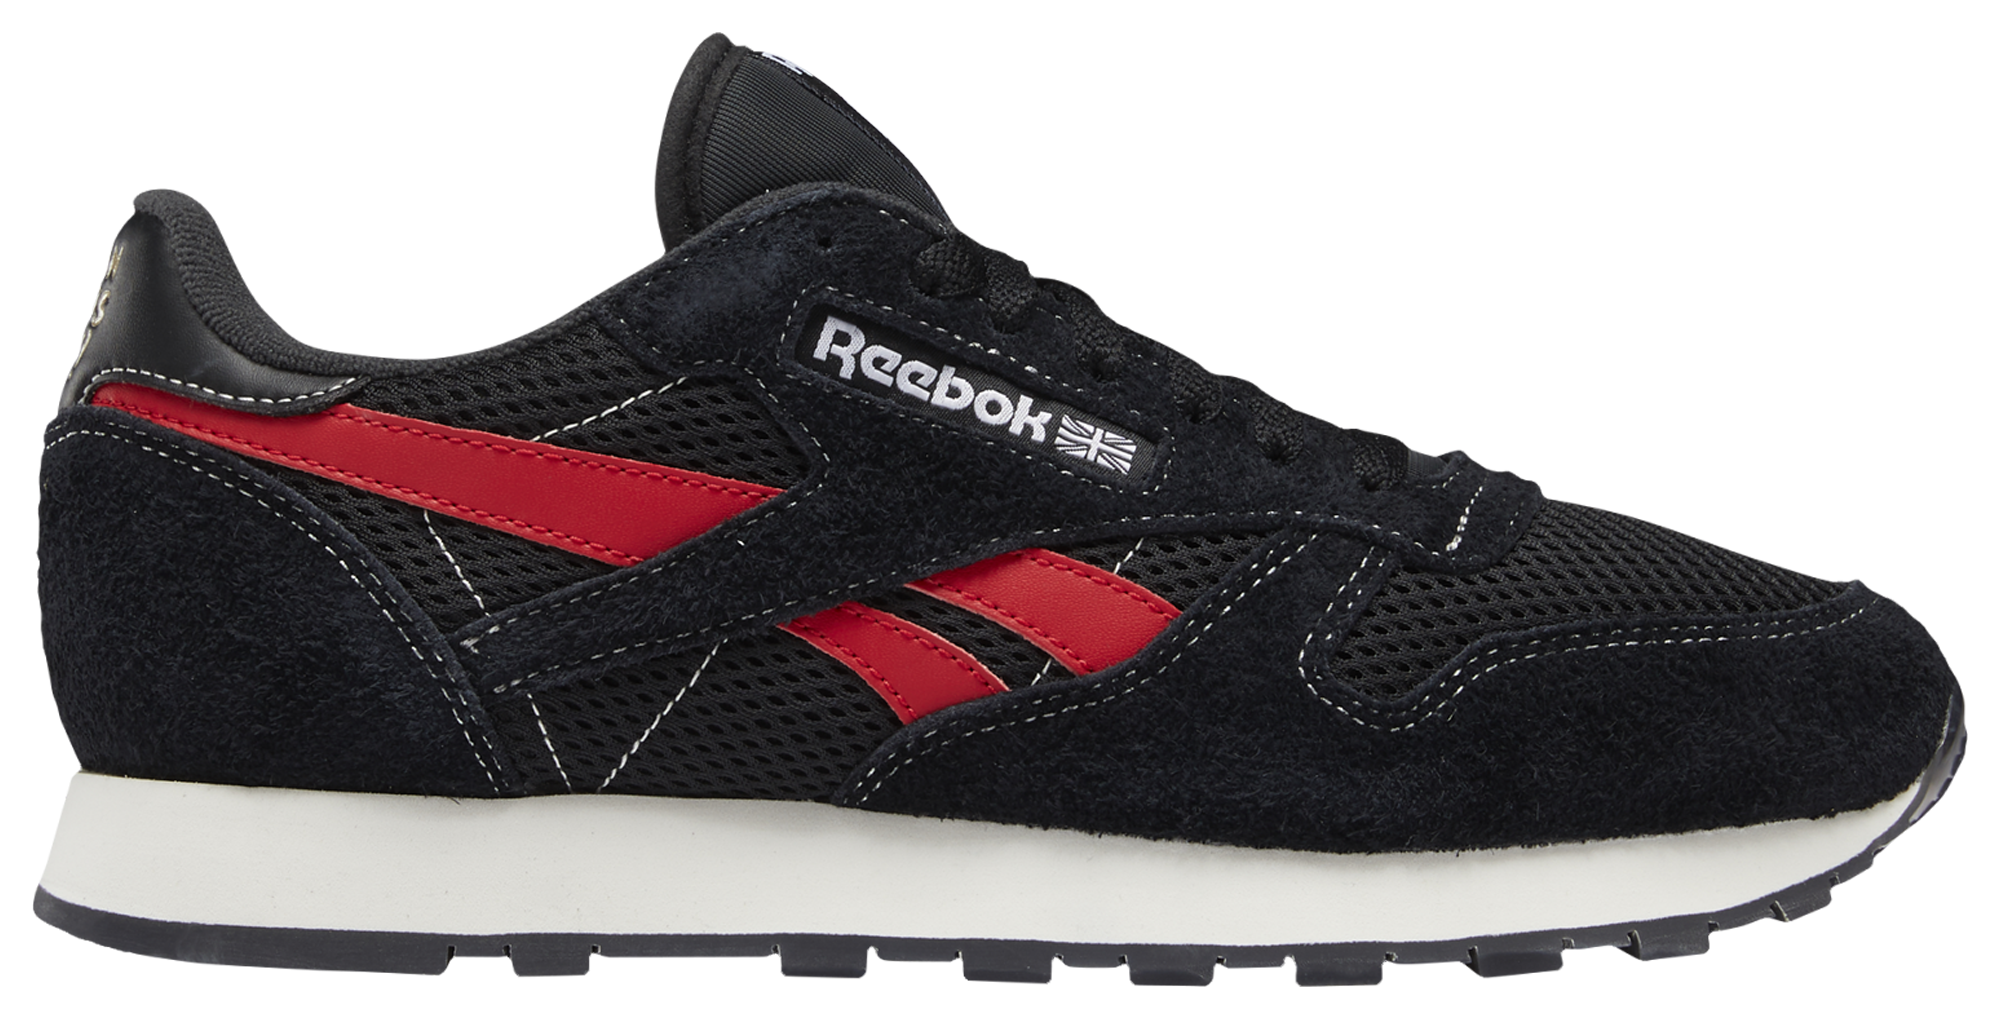 Reebok Classic Leather for anyone who is not afraid to live